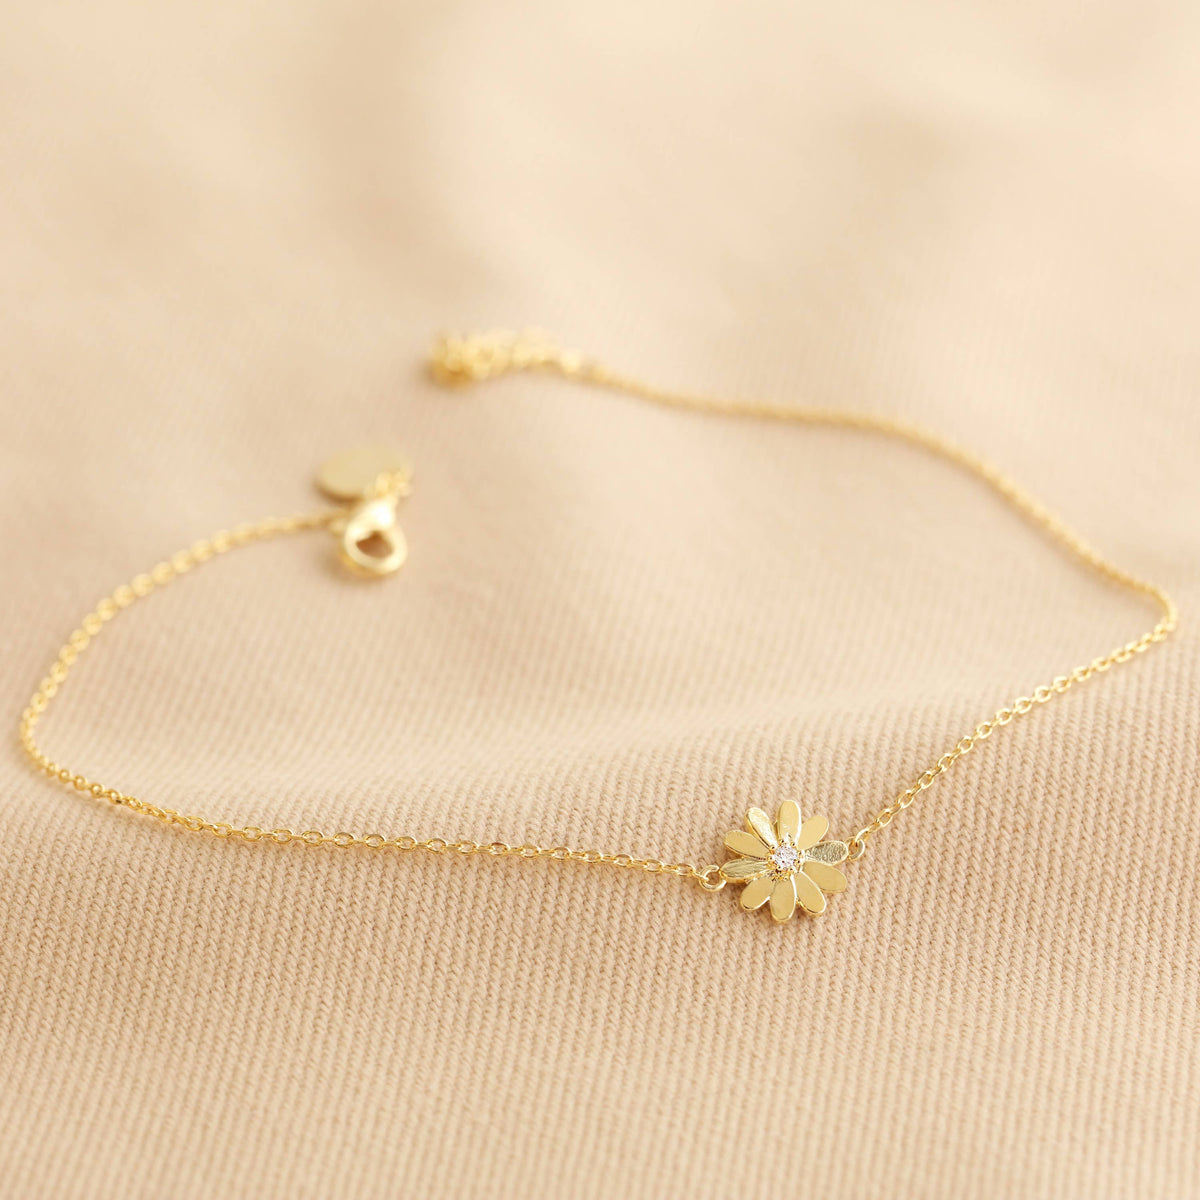 Lisa Angel Accessories Daisy Anklet in Gold